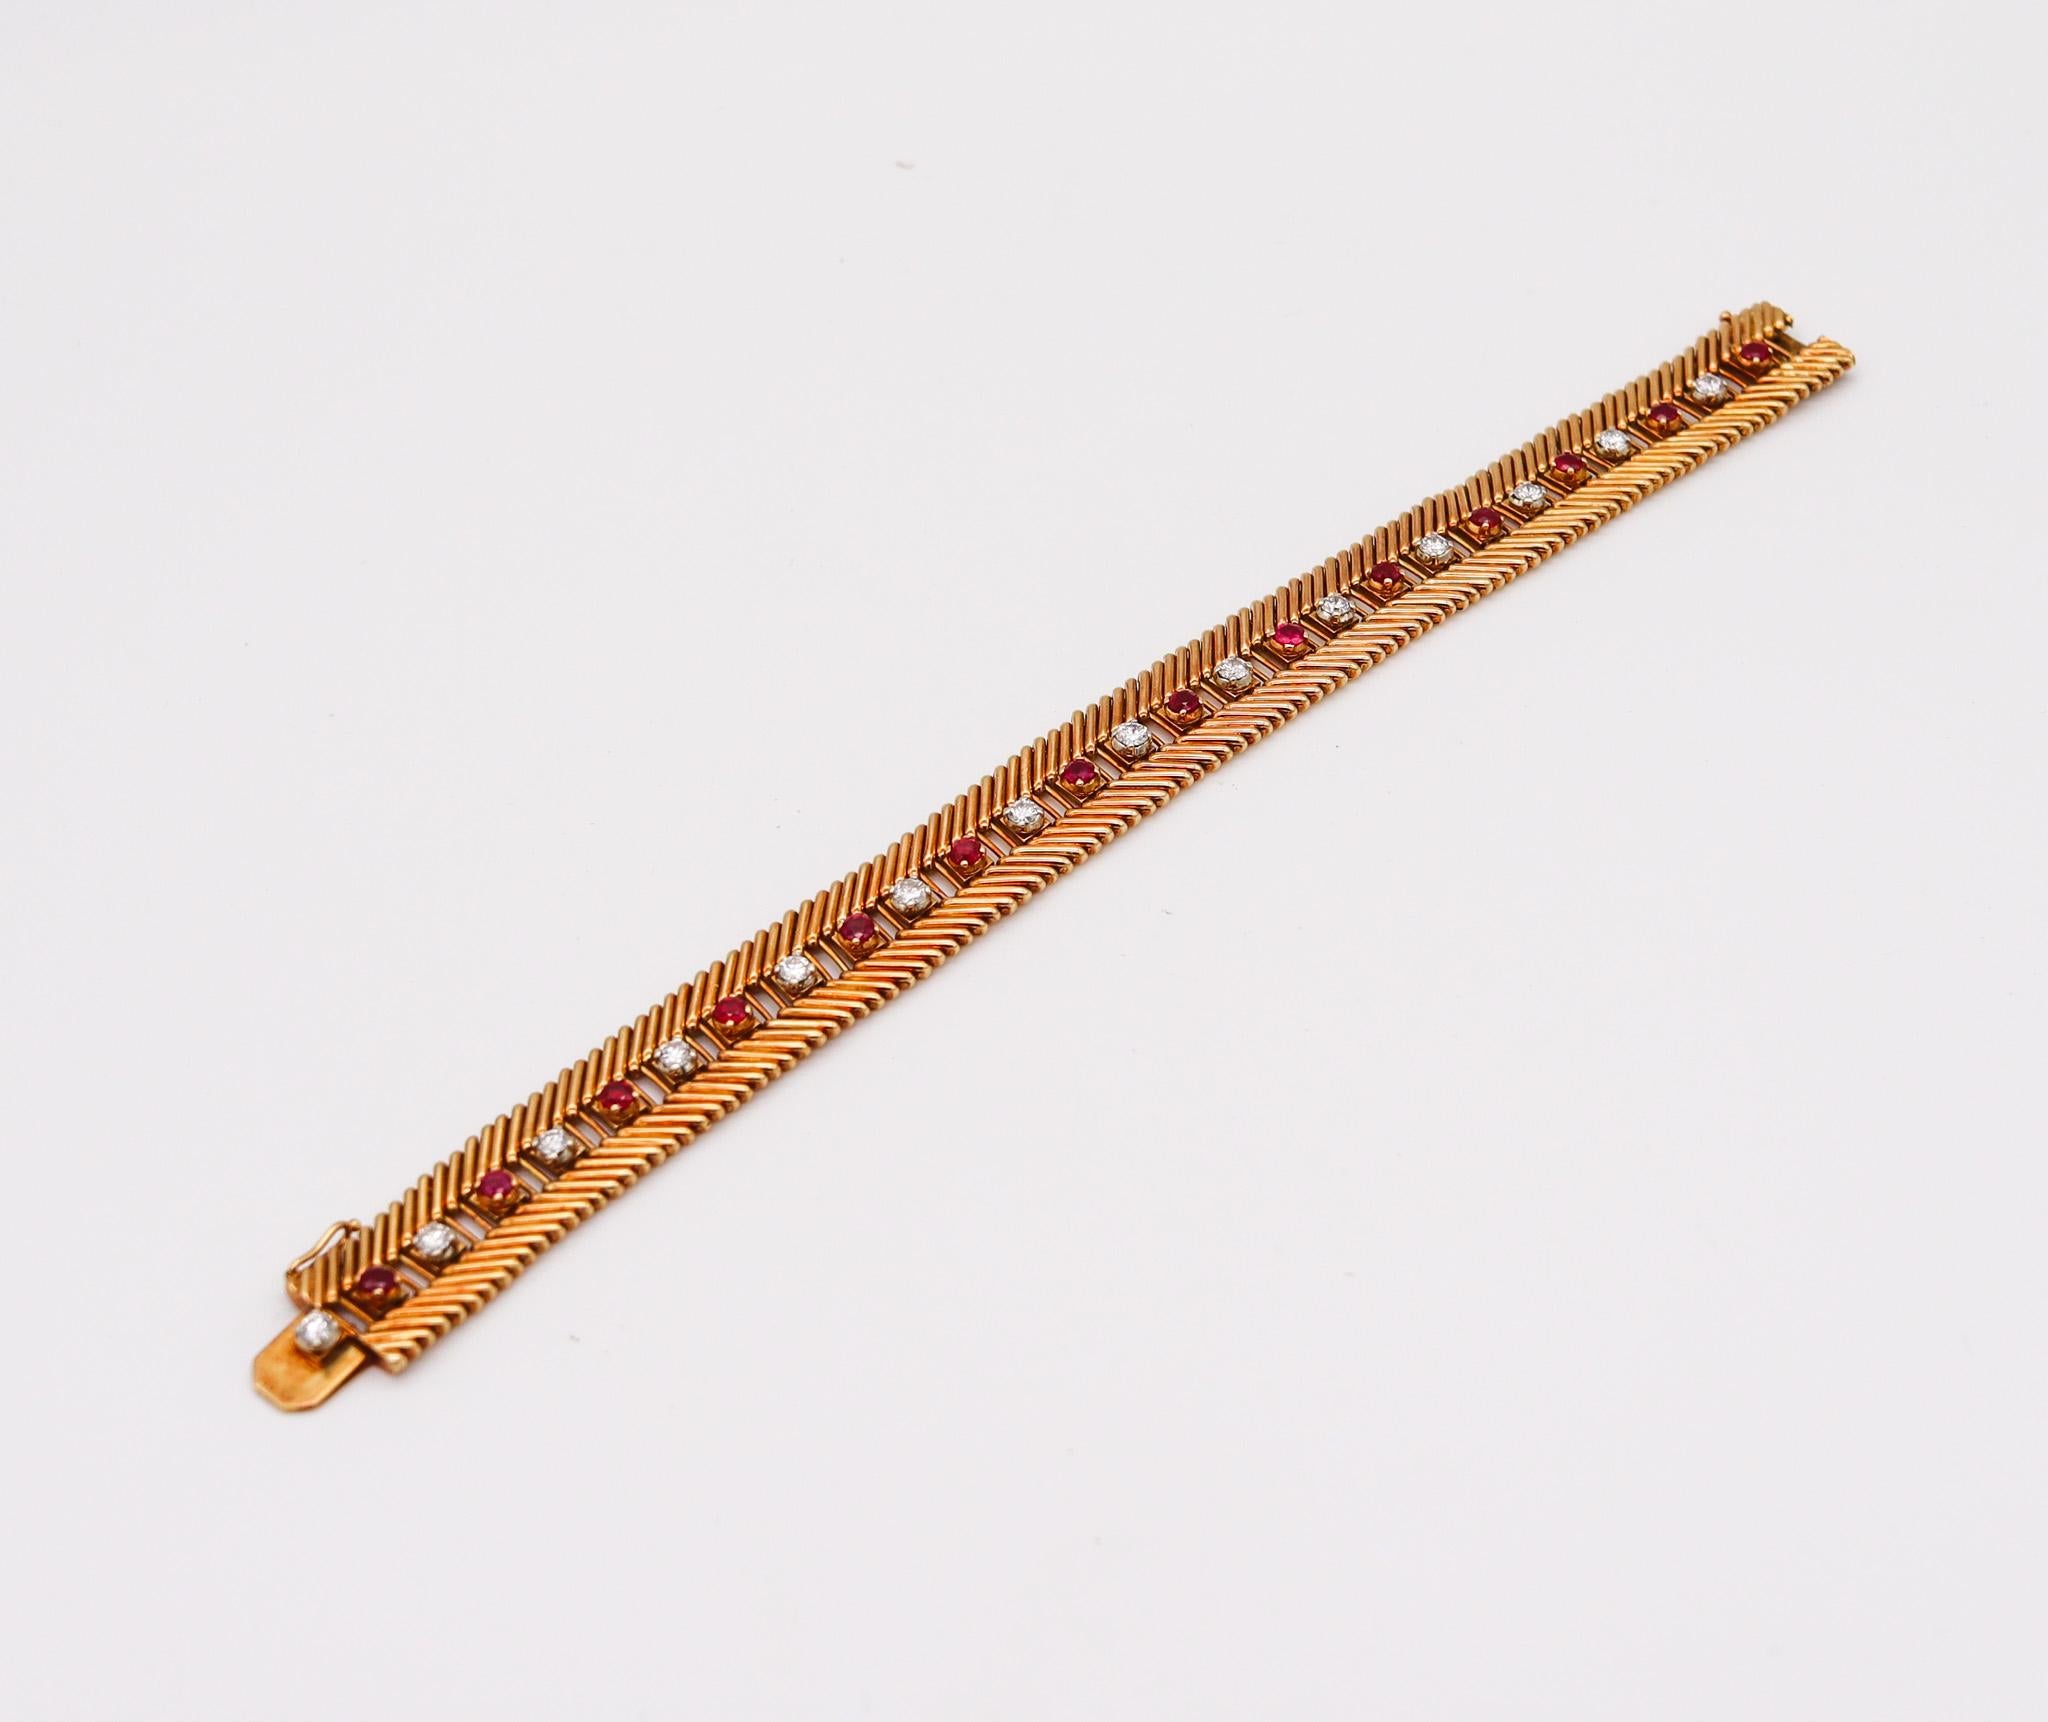 Modernist Bvlgari Milano 1950 Bracelet in 18kt Gold with 5.42ctw in Rubies and Diamonds For Sale